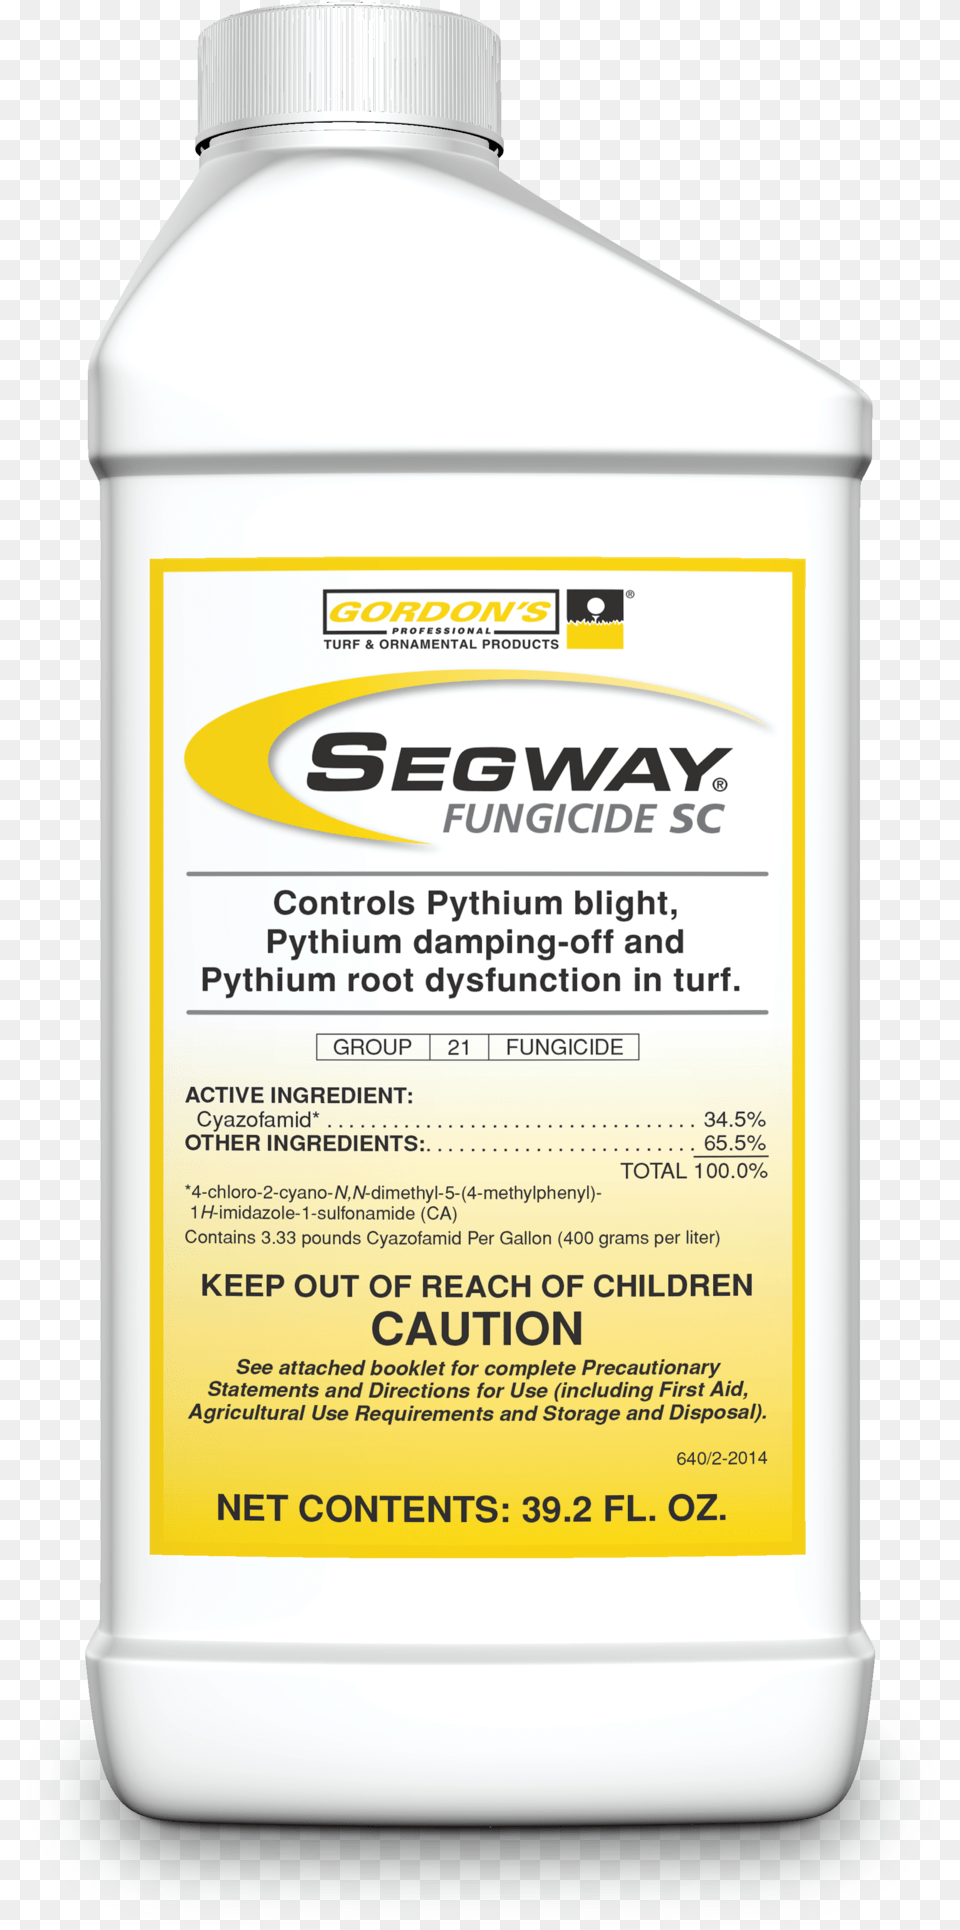 Segway Fungicide Sc Segway Fungicide Label Scientific Name, Bottle, Shaker Free Png